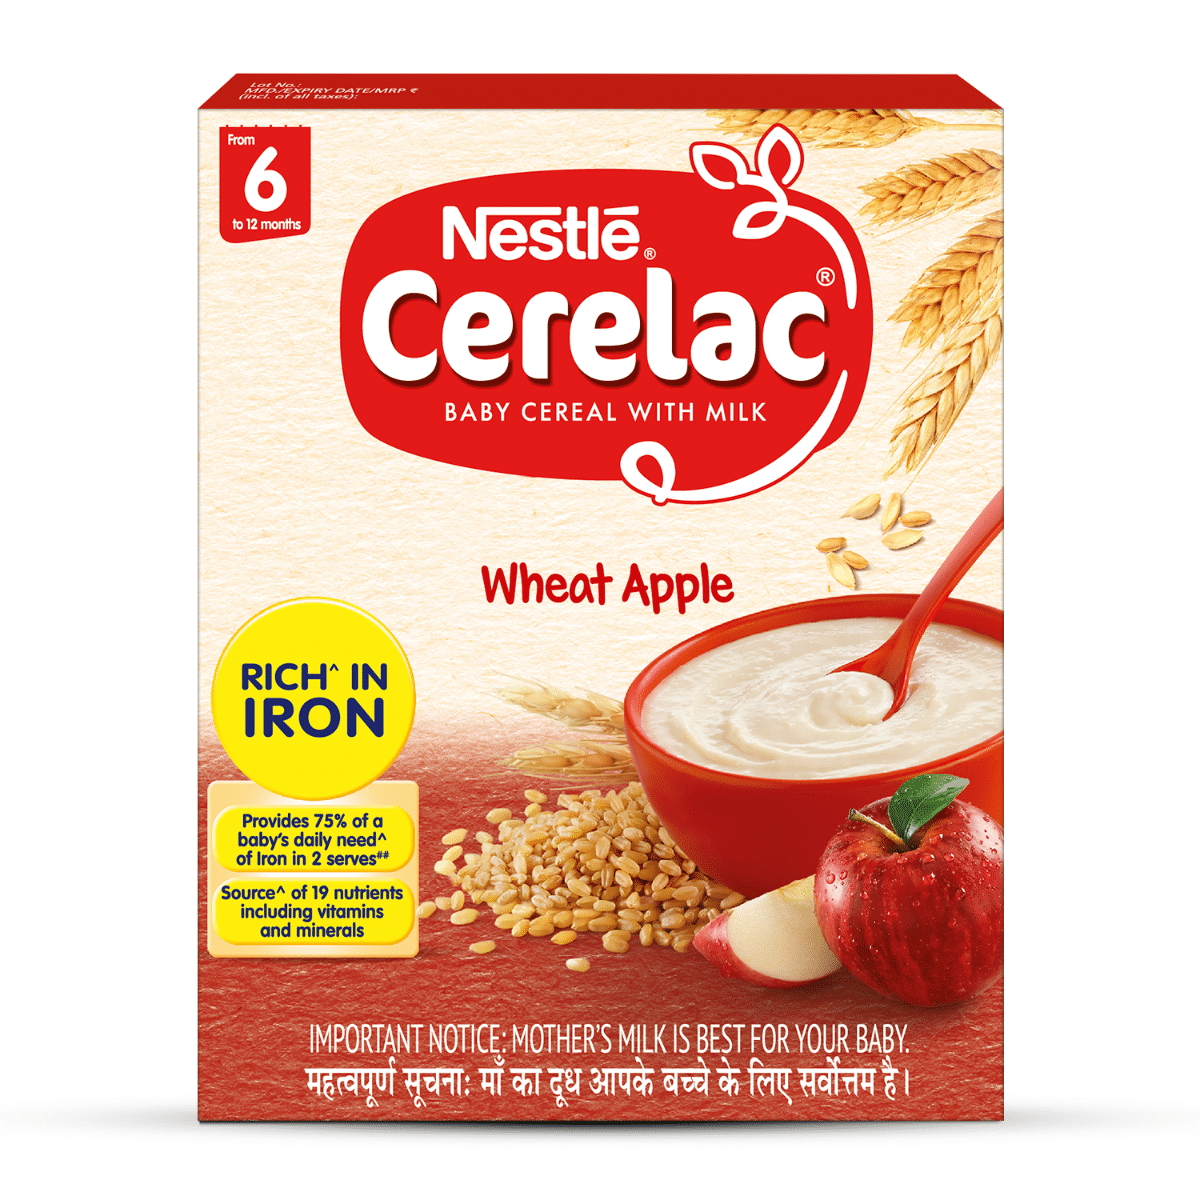 Nestle Cerelac Baby Cereal with Milk Wheat Apple (From 6 to 12 Months) Powder, 300 gm Refill Pack, Pack of 1 